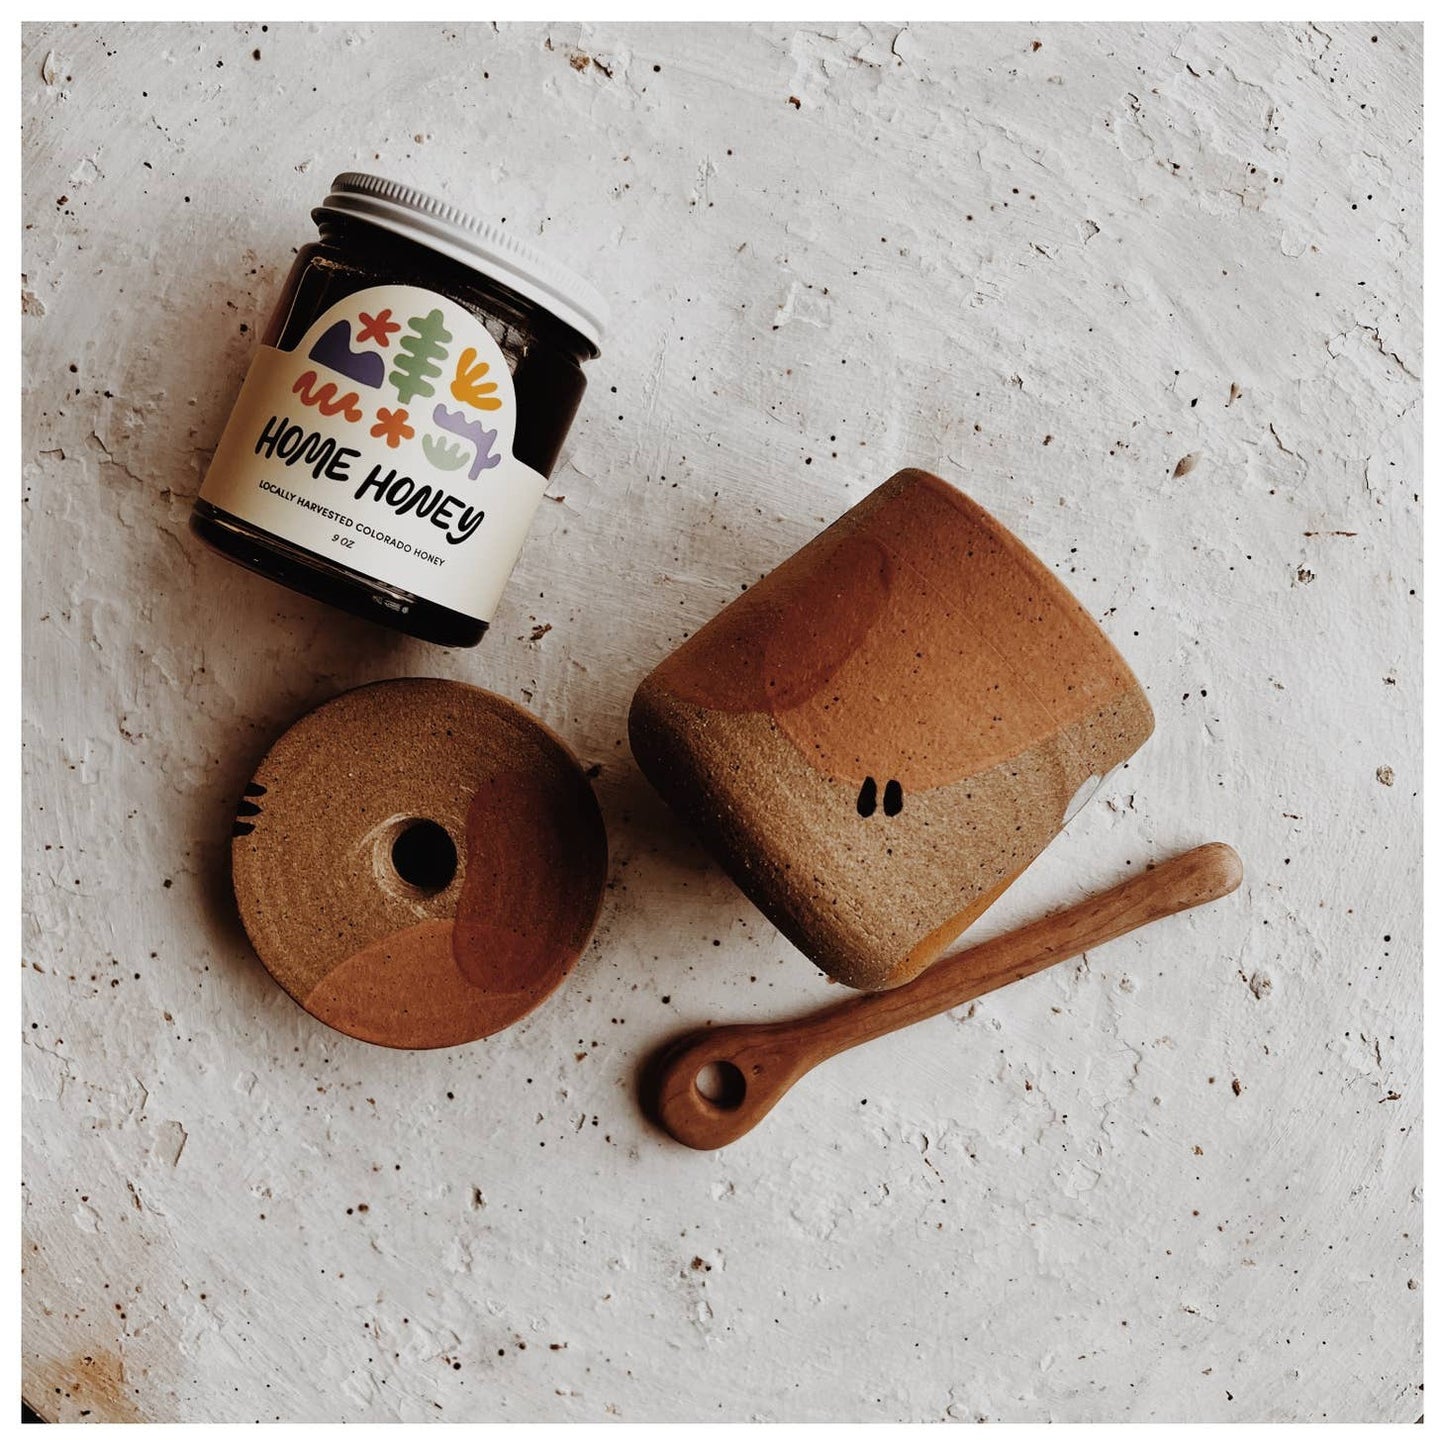 Painted dune honey pot with hand carved stick.  Glazed interior with raw clay exterior. Painted accents in dusty pink, burnt orange and light blue with black specks. Each piece is crafted by the same set of hands, which belong to Andi at Good Hearted Woman. Based in Denver, CO.